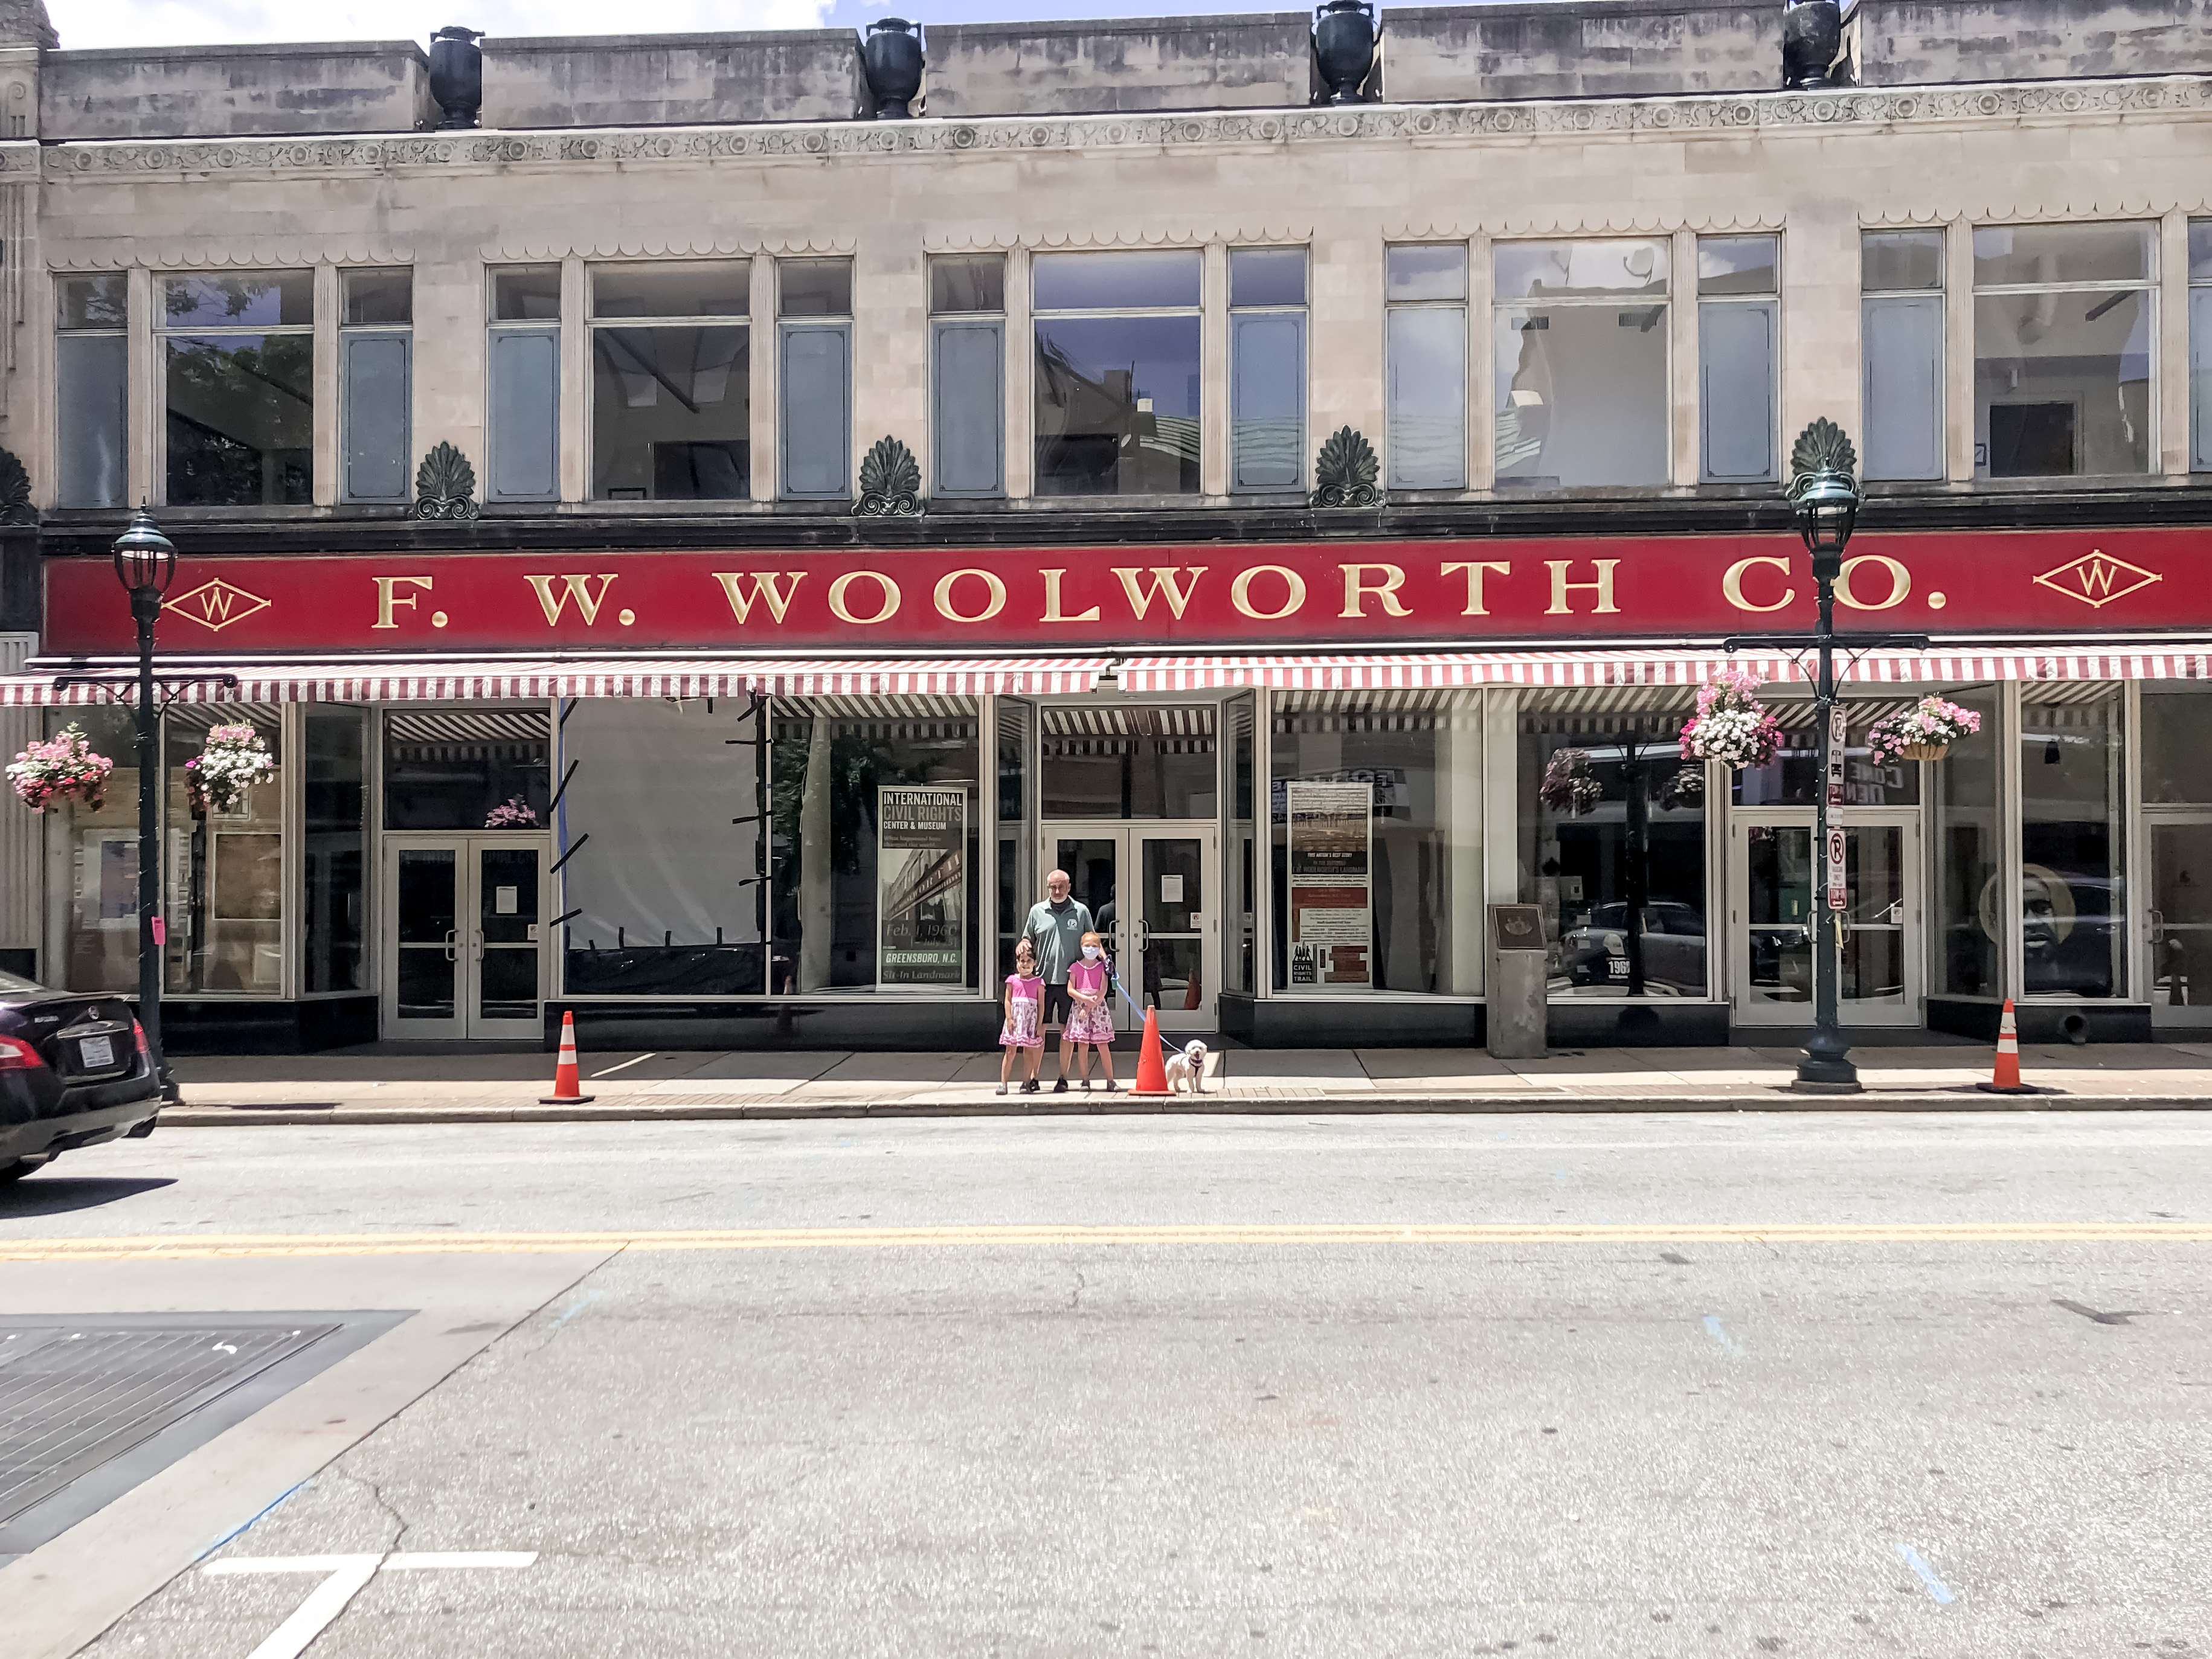 Woolworth Lunch Counter Sit-in in Greensboro, NC. Birthplace of the Civil Rights Movement. 